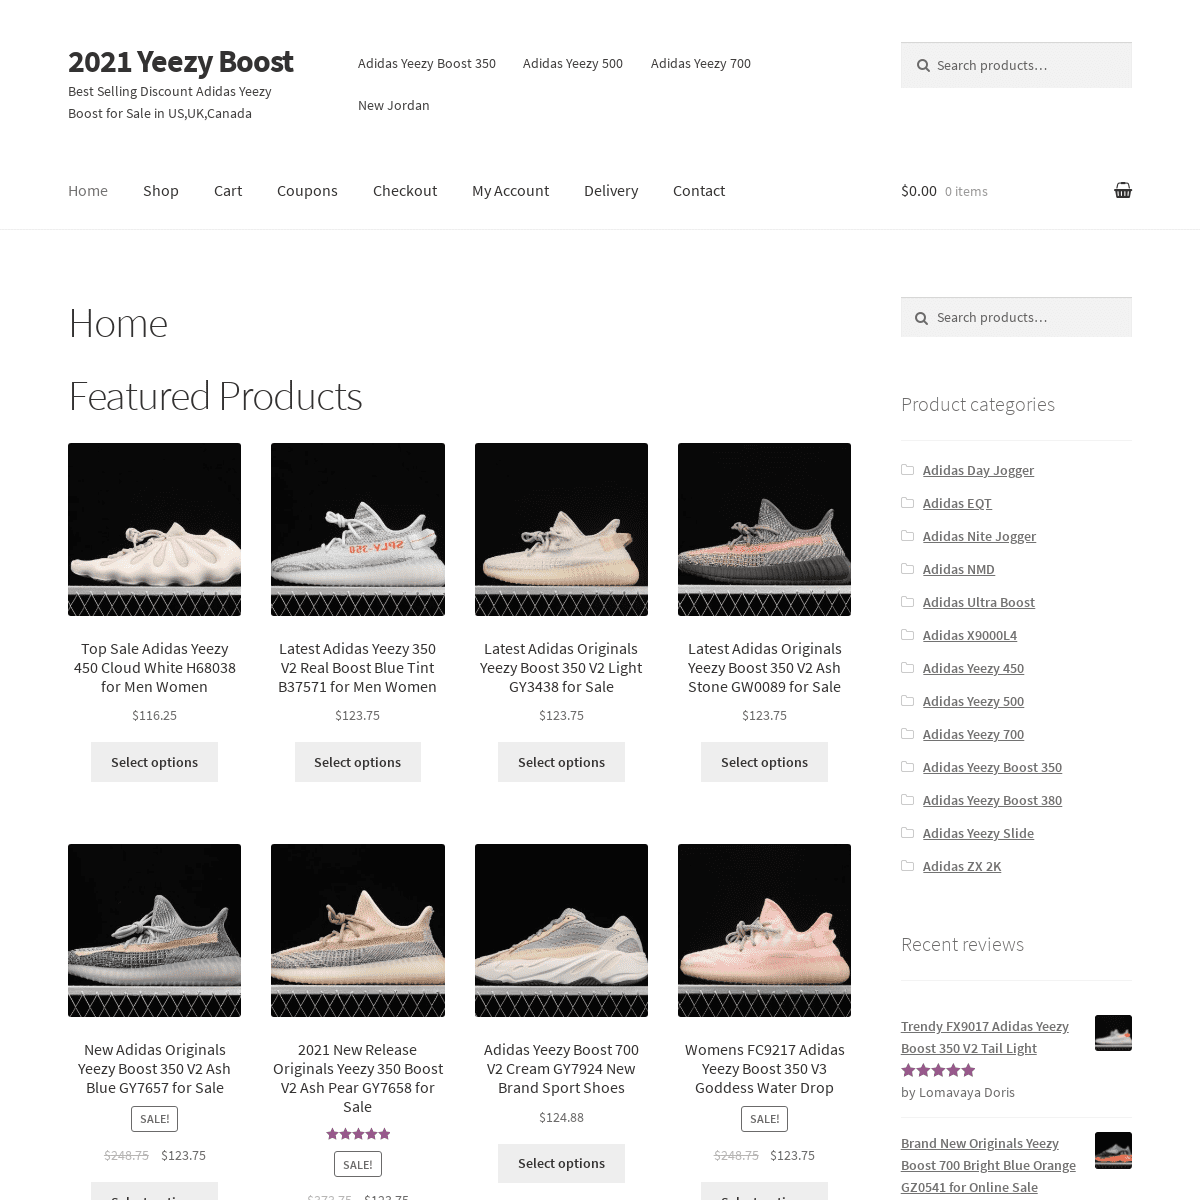 A complete backup of https://2021yeezyboost.com